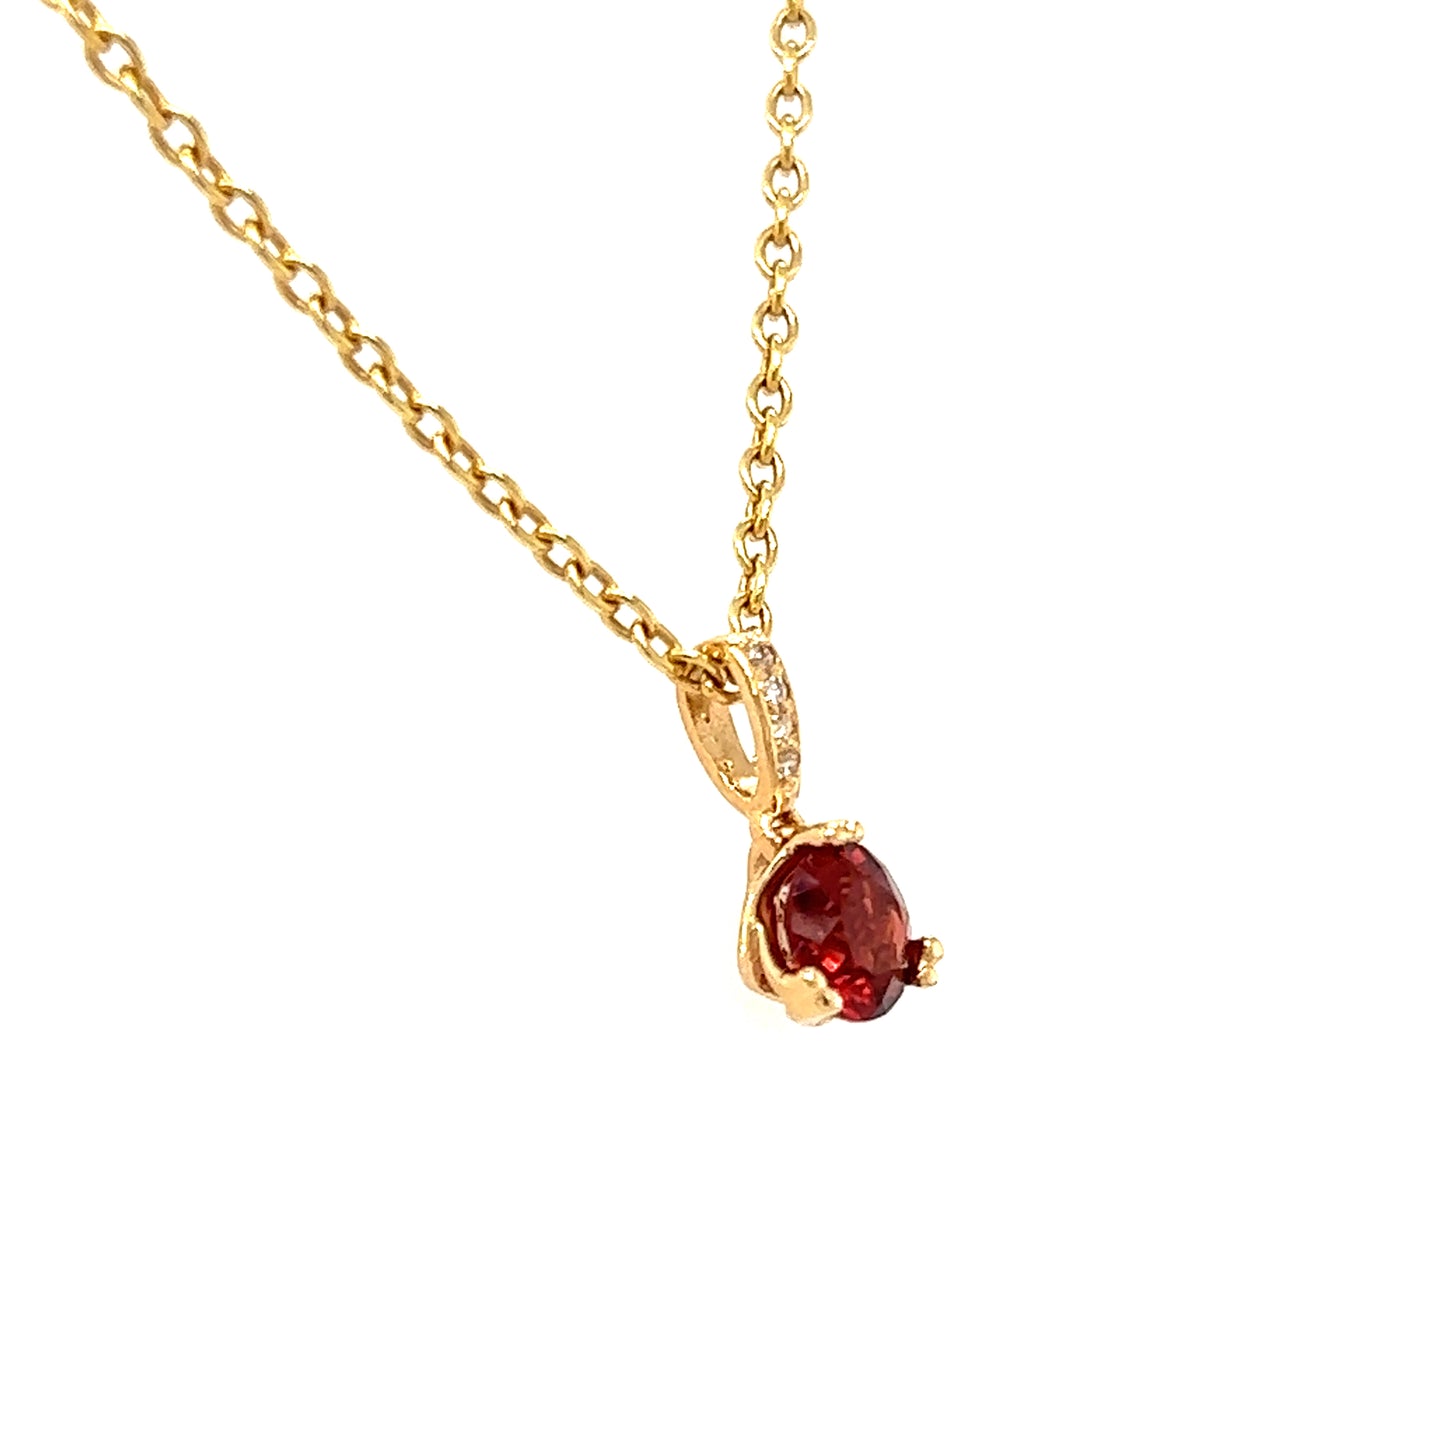 Round Garnet Pendant With Four Diamonds in 14K Yellow Gold Right Side Pendant and Chain